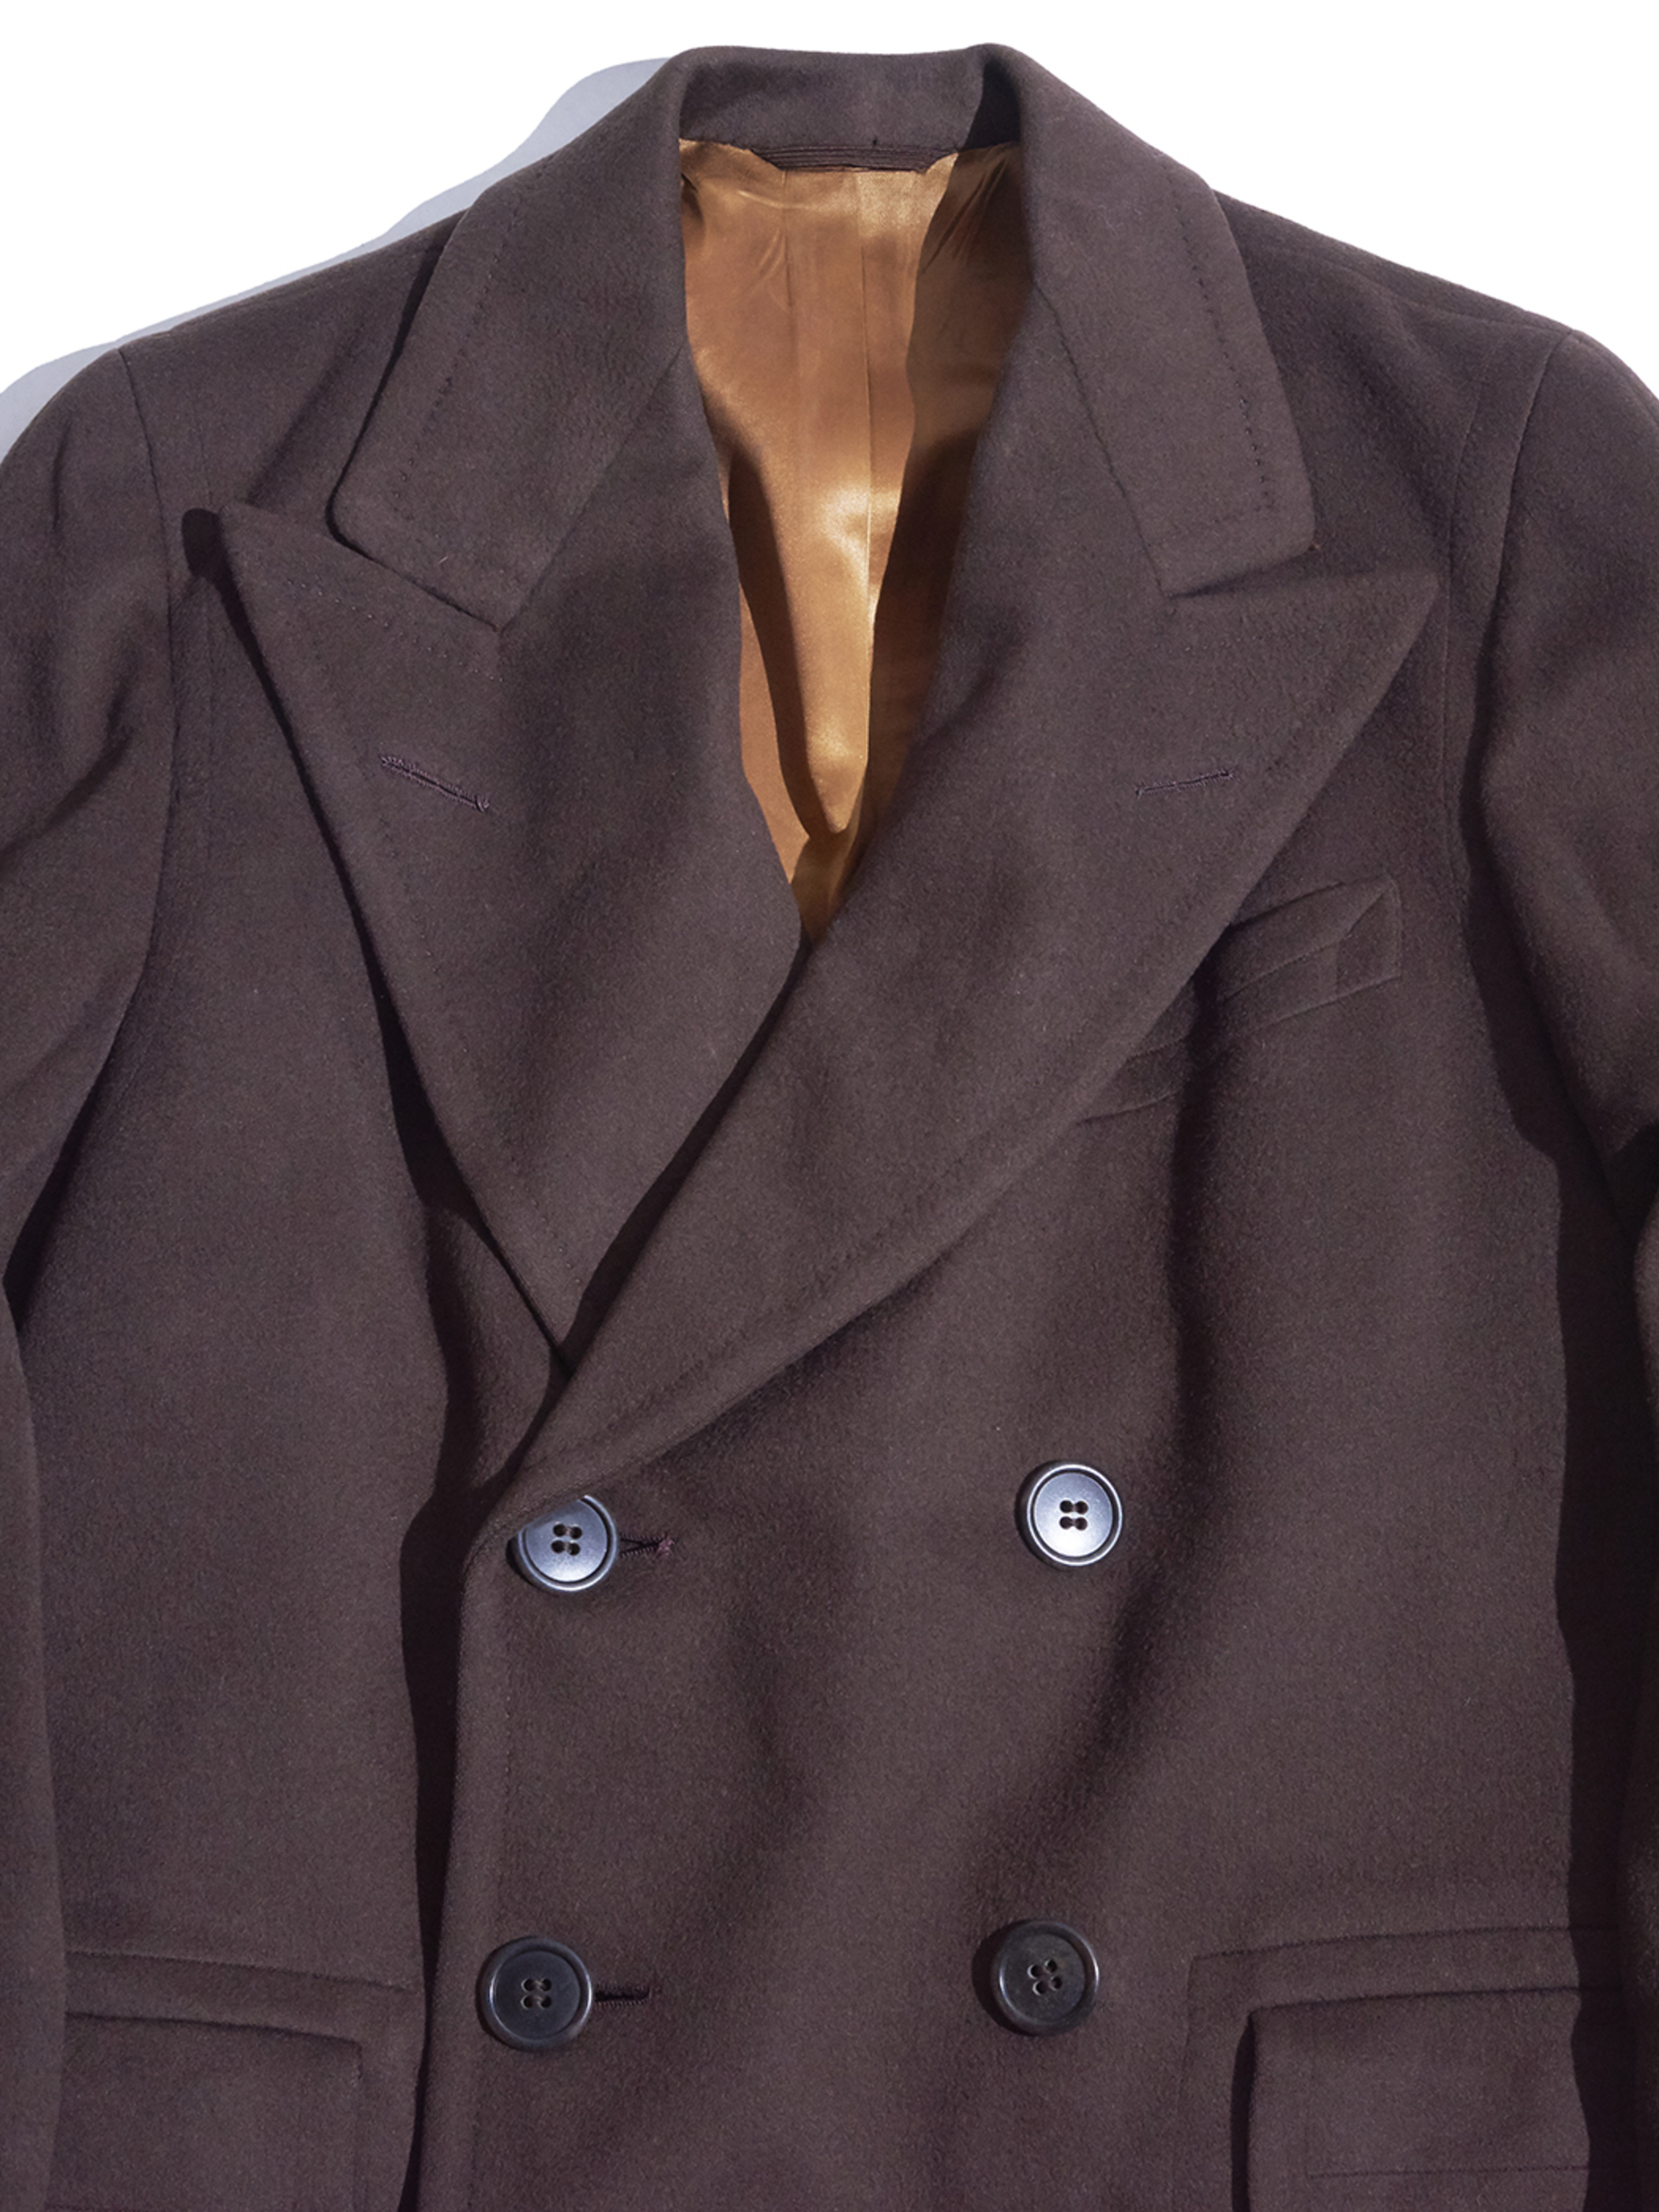 1960s "Bord Brother" wool double breasted coat -BROWN-